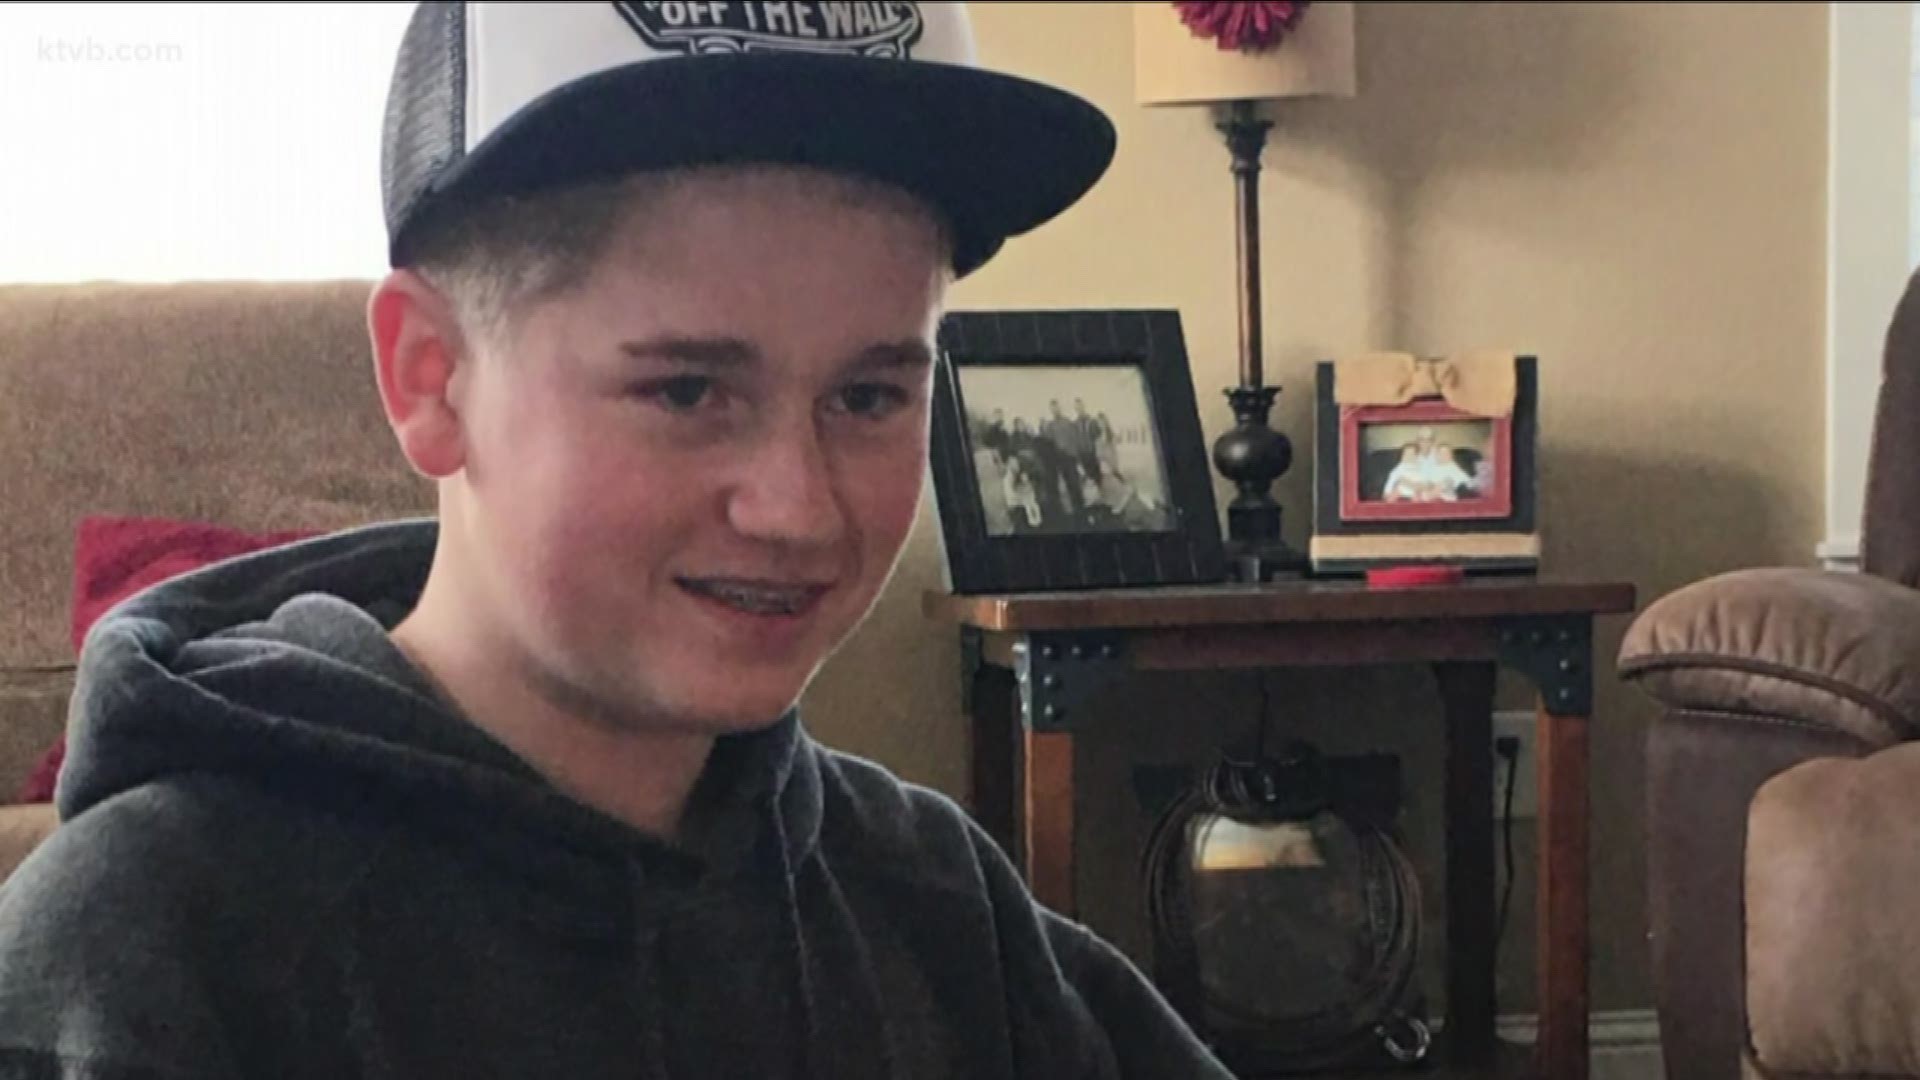 "It was $30, it cost him $30 for this pill, and that is the value of his life for someone pushing these pills on kids," the mother told KTVB.